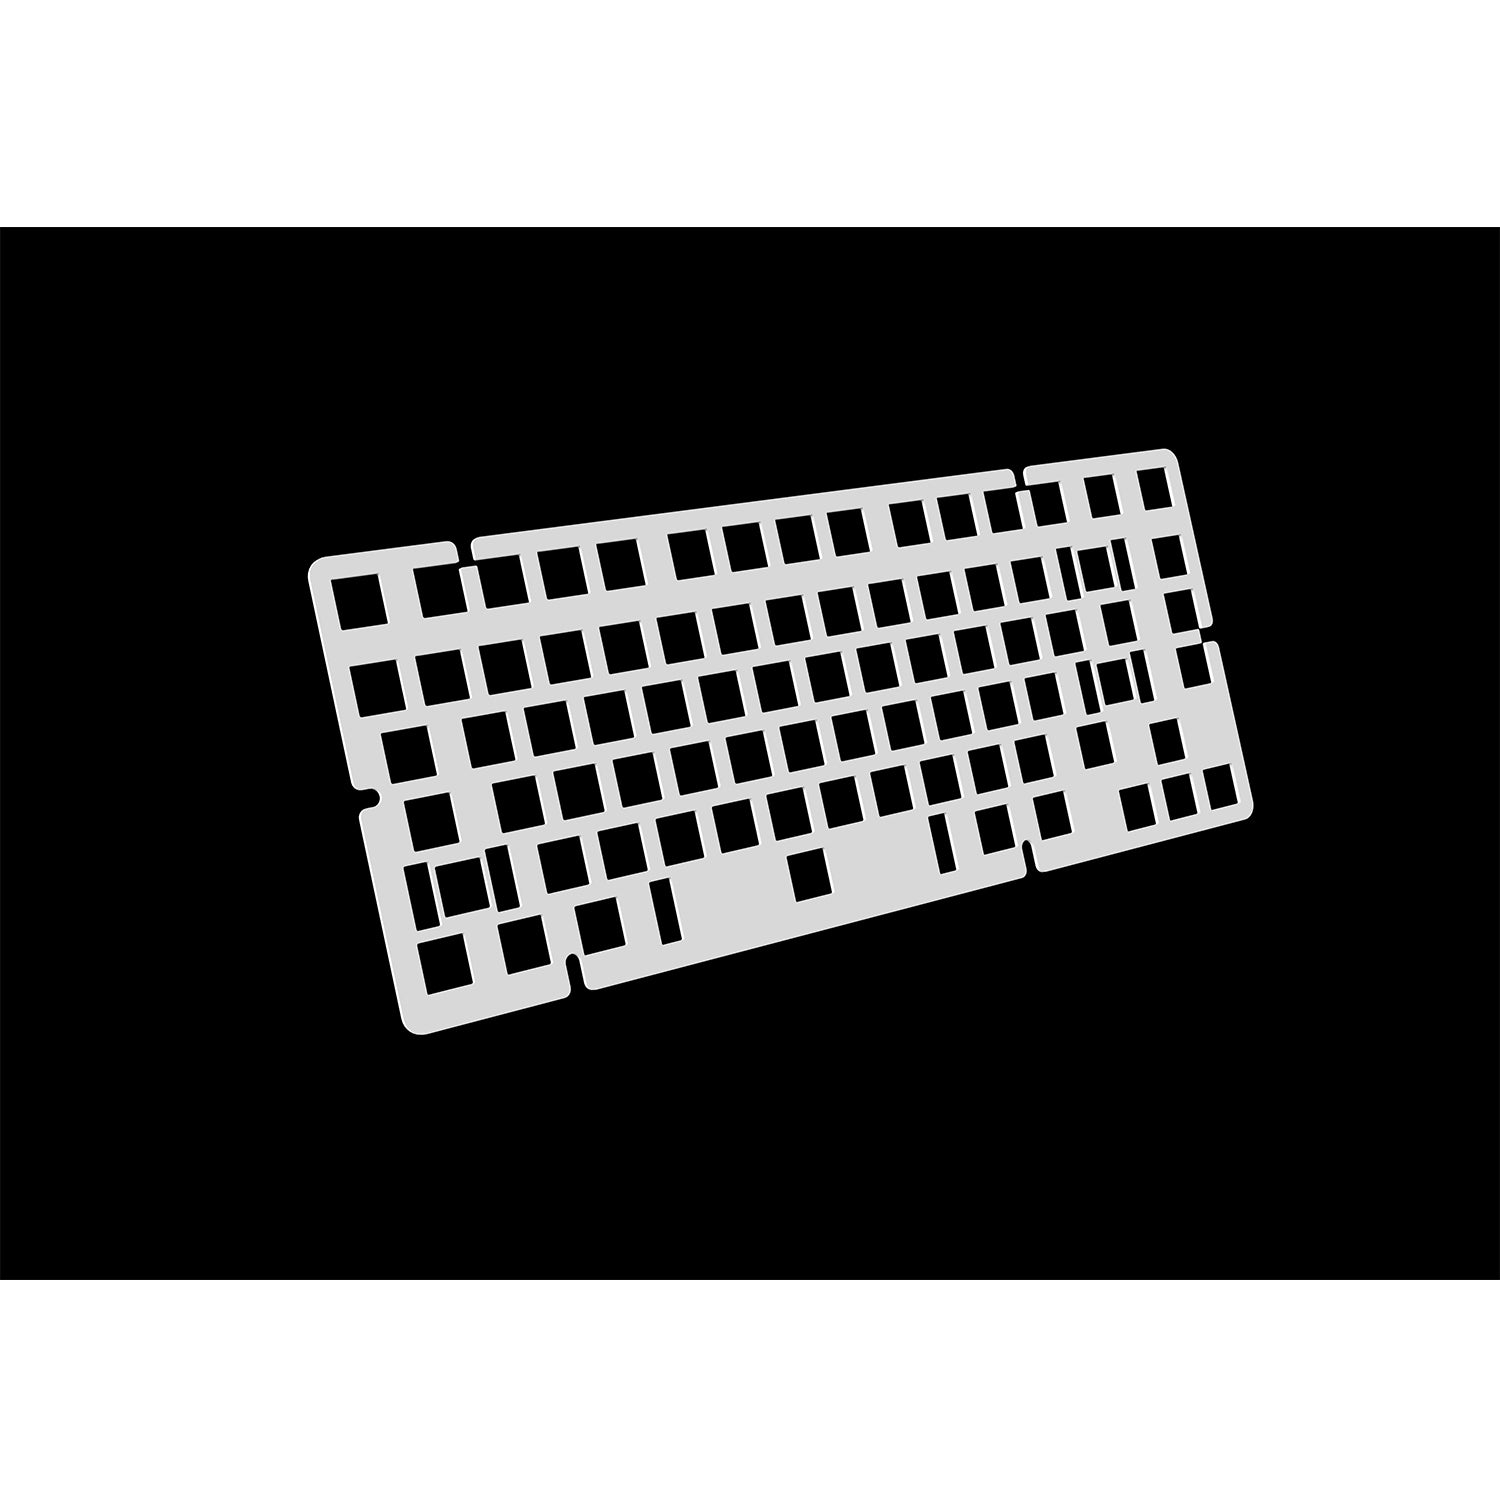 [EXTRA] DOLPHINS75 KEYBOARD KIT ADD ON (FREE SHIPPING)